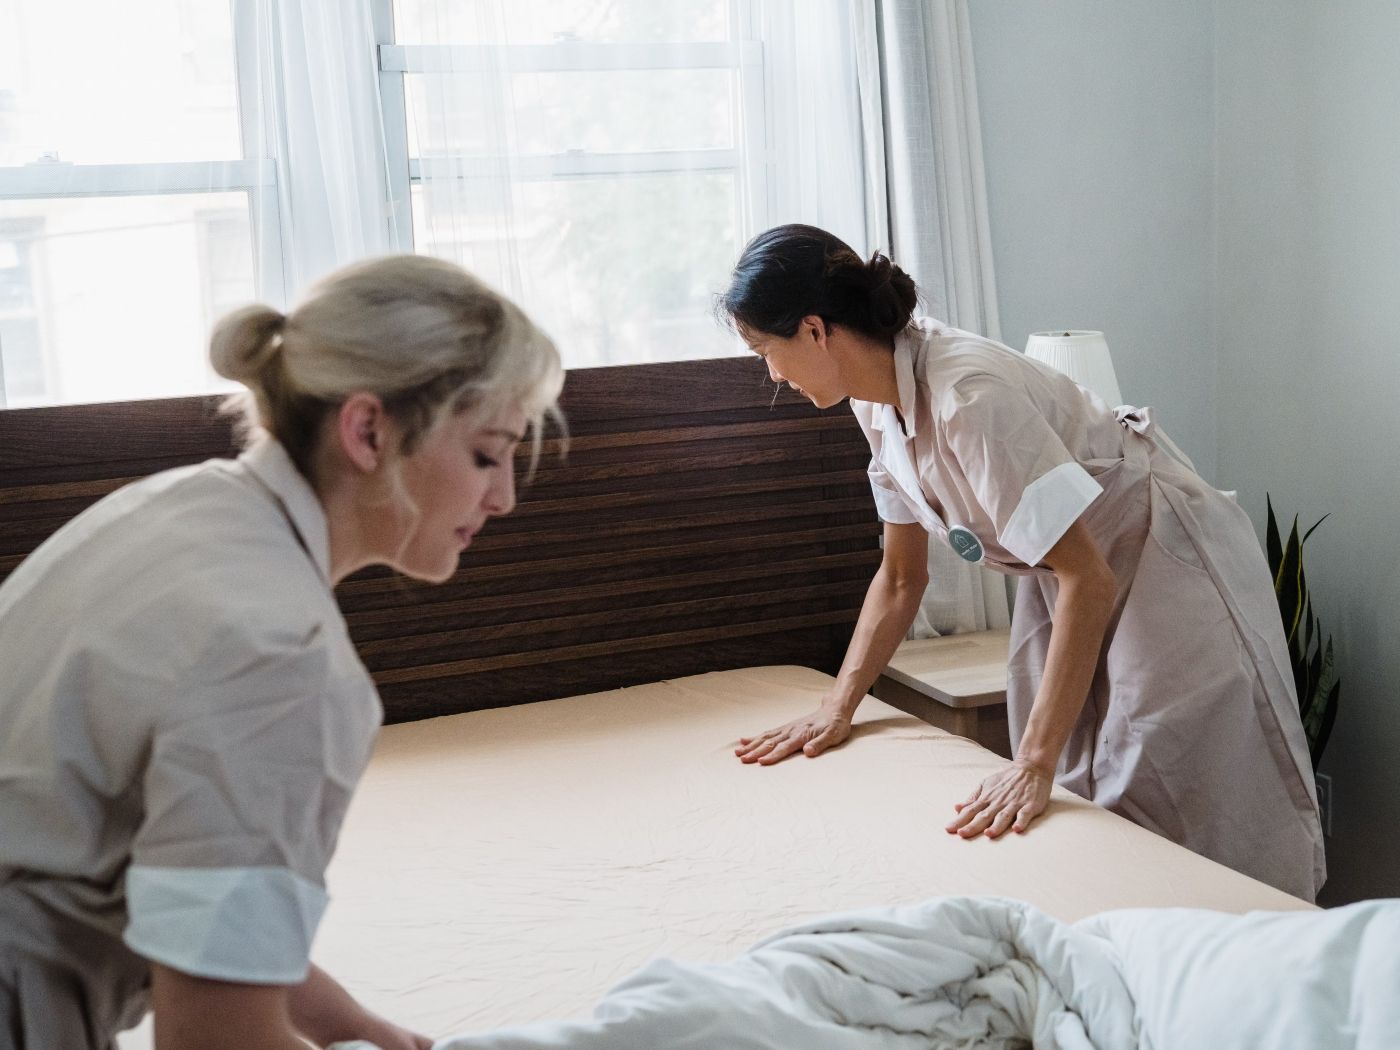 Hotel Staff Fixing the Sheets of a Bed 